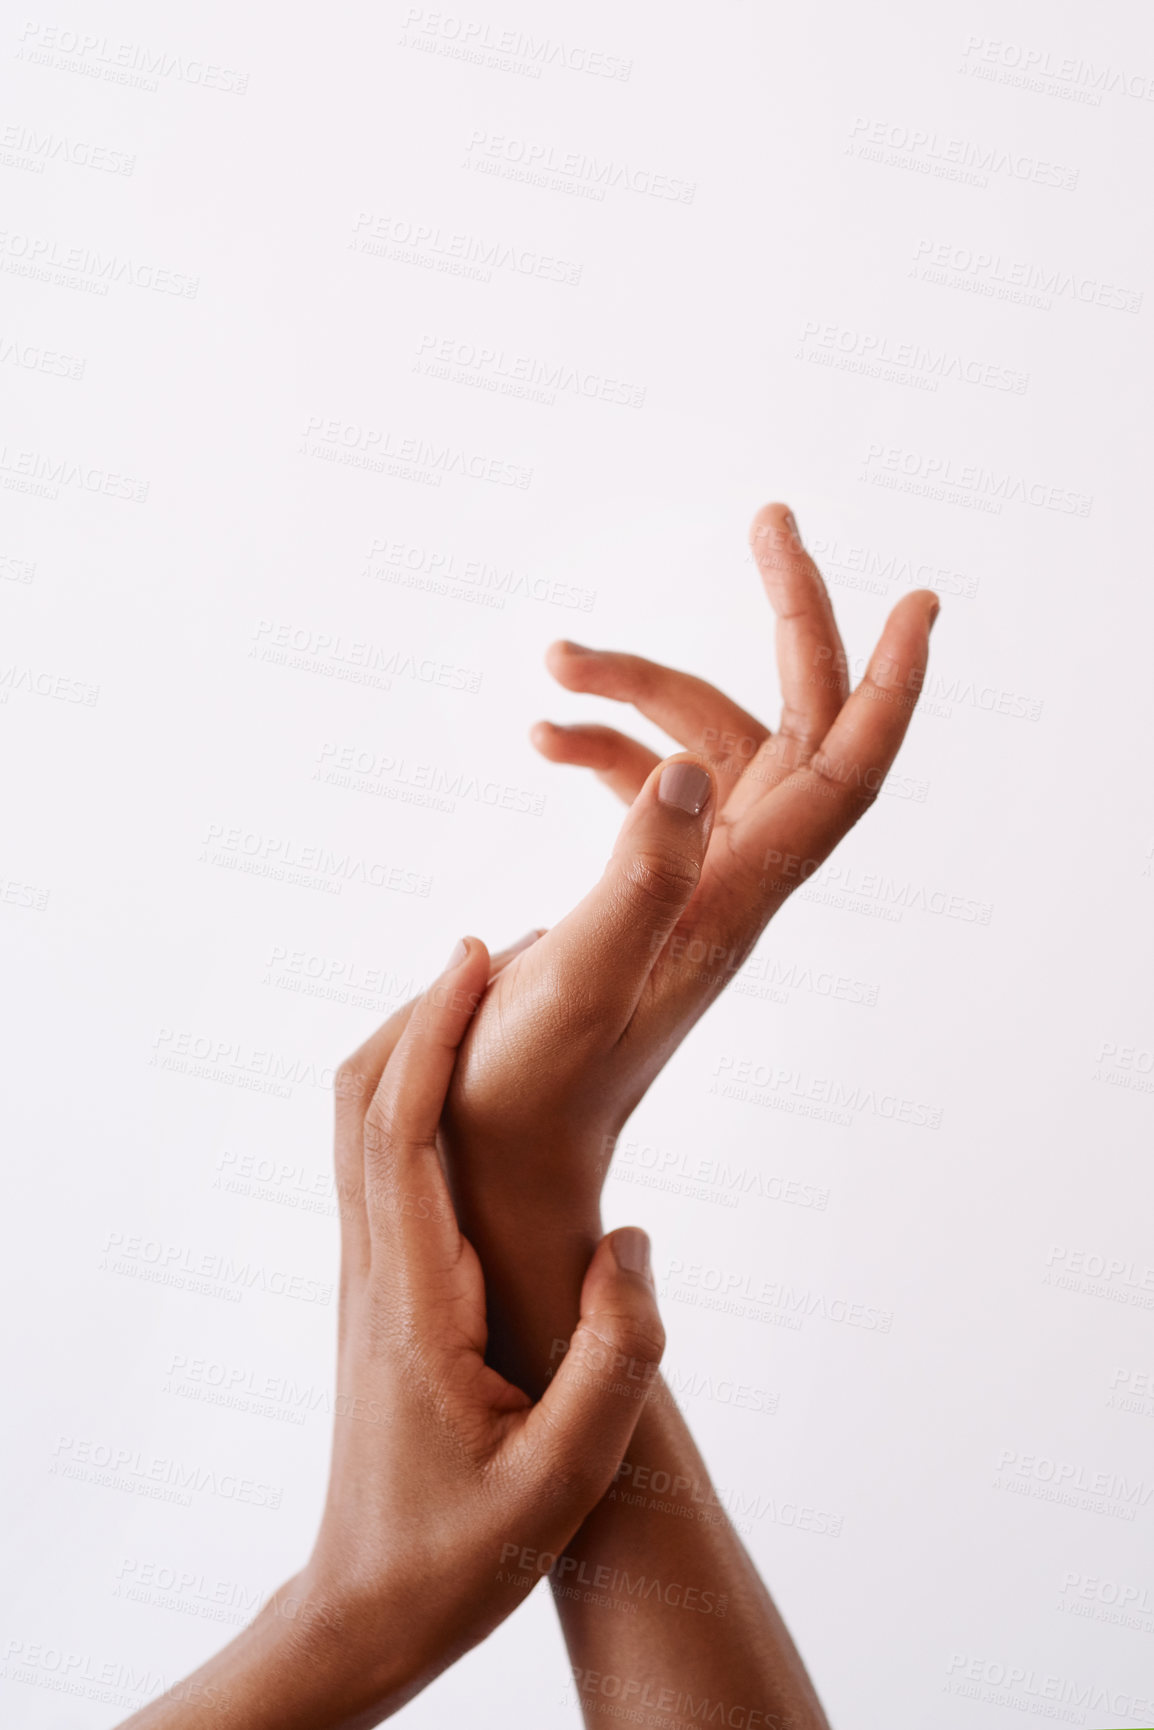 Buy stock photo Studio shot of an unrecognizable woman's hands against a white background